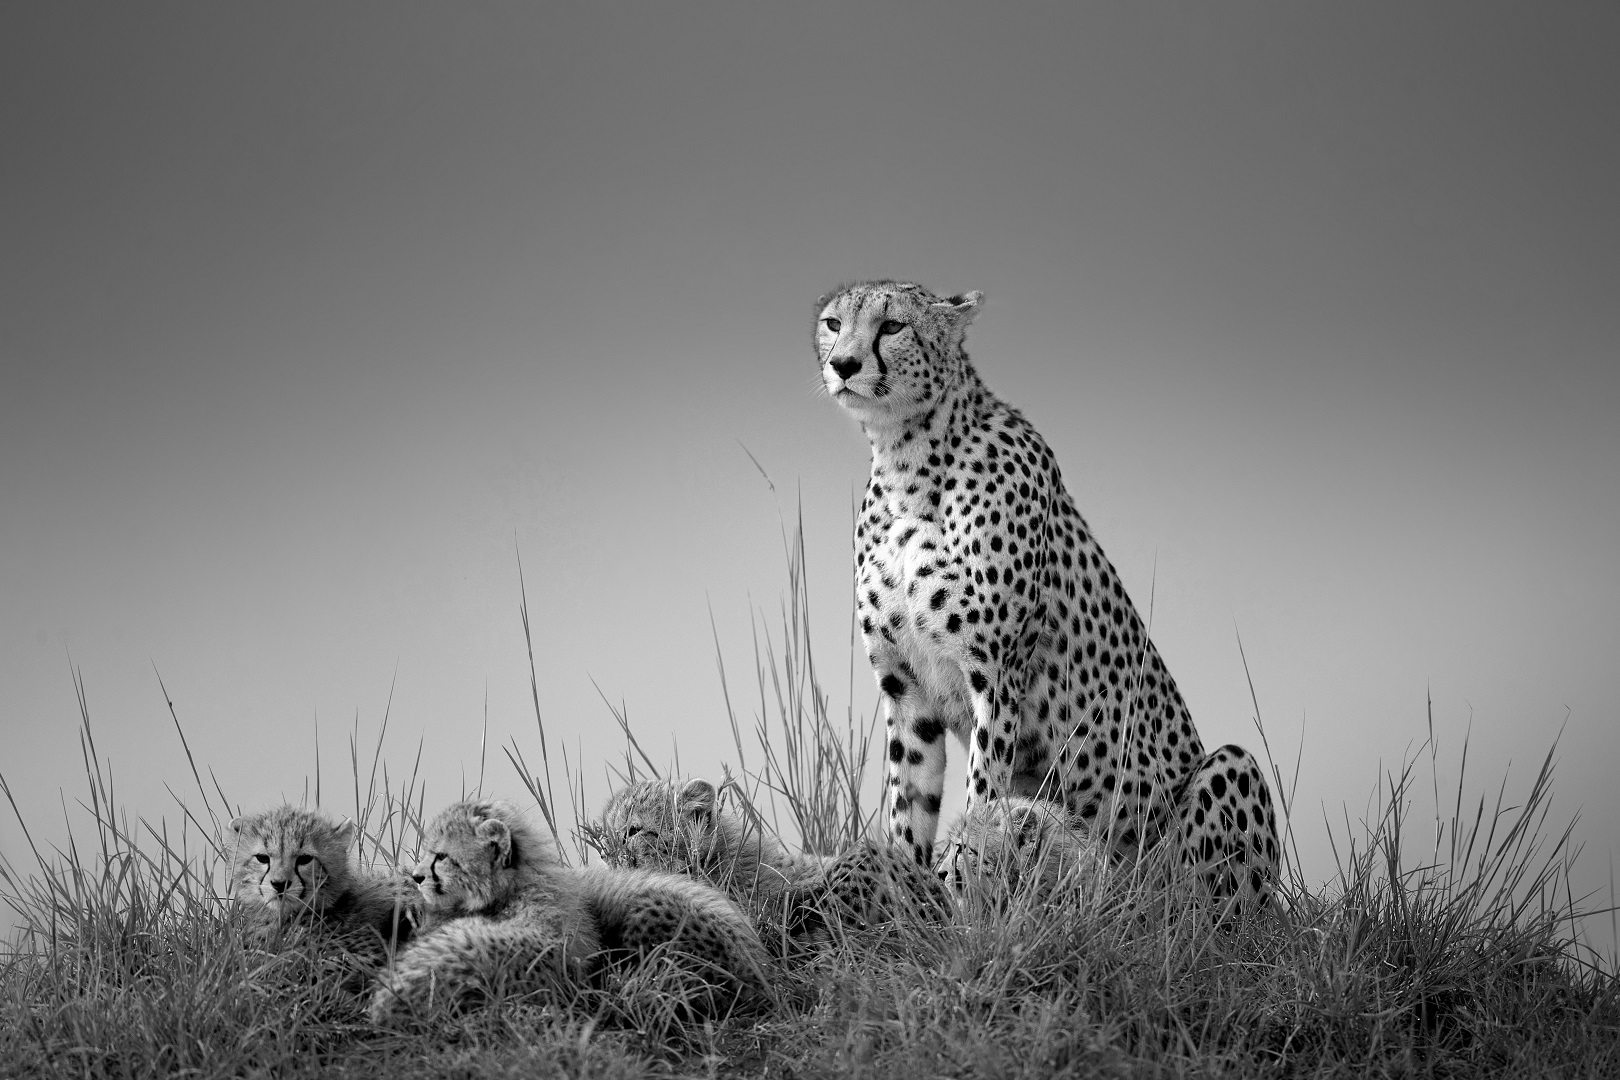 Cheetah with cubs, by Johan Willems. Winning image of the first edition of the international photography contest: Black and White Photo Awards.